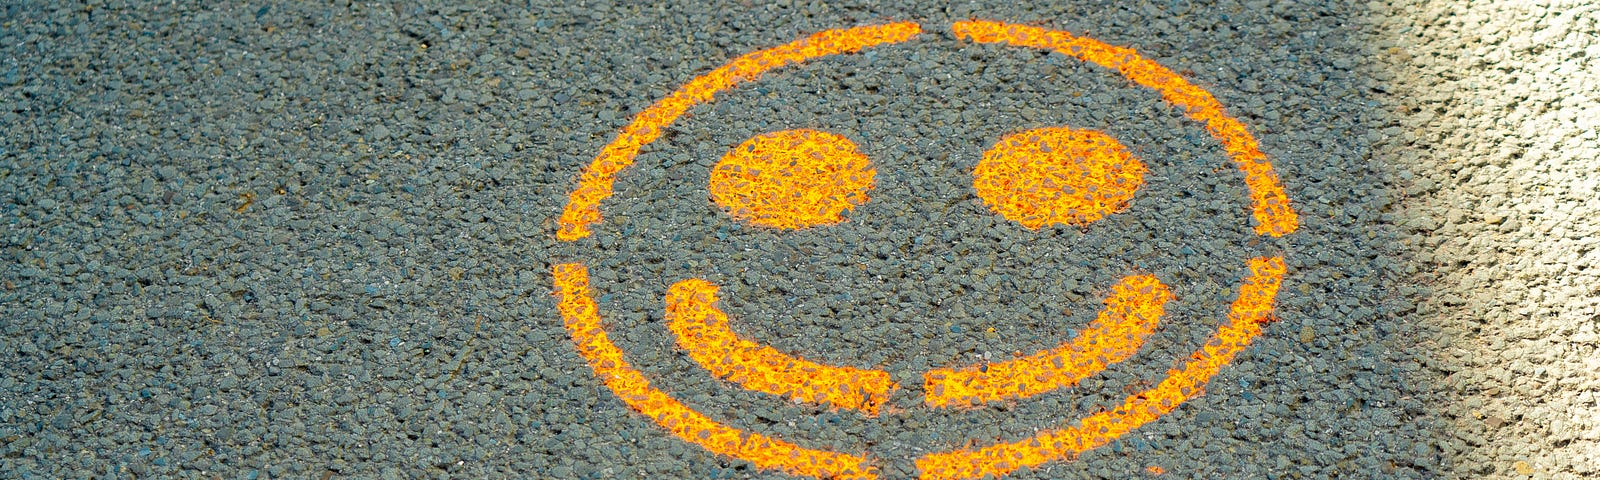 Spray painted on gray pavement are the words “STAY SAFE” in capital letters, colored white. Just above the words, we see a yellow smiley face.